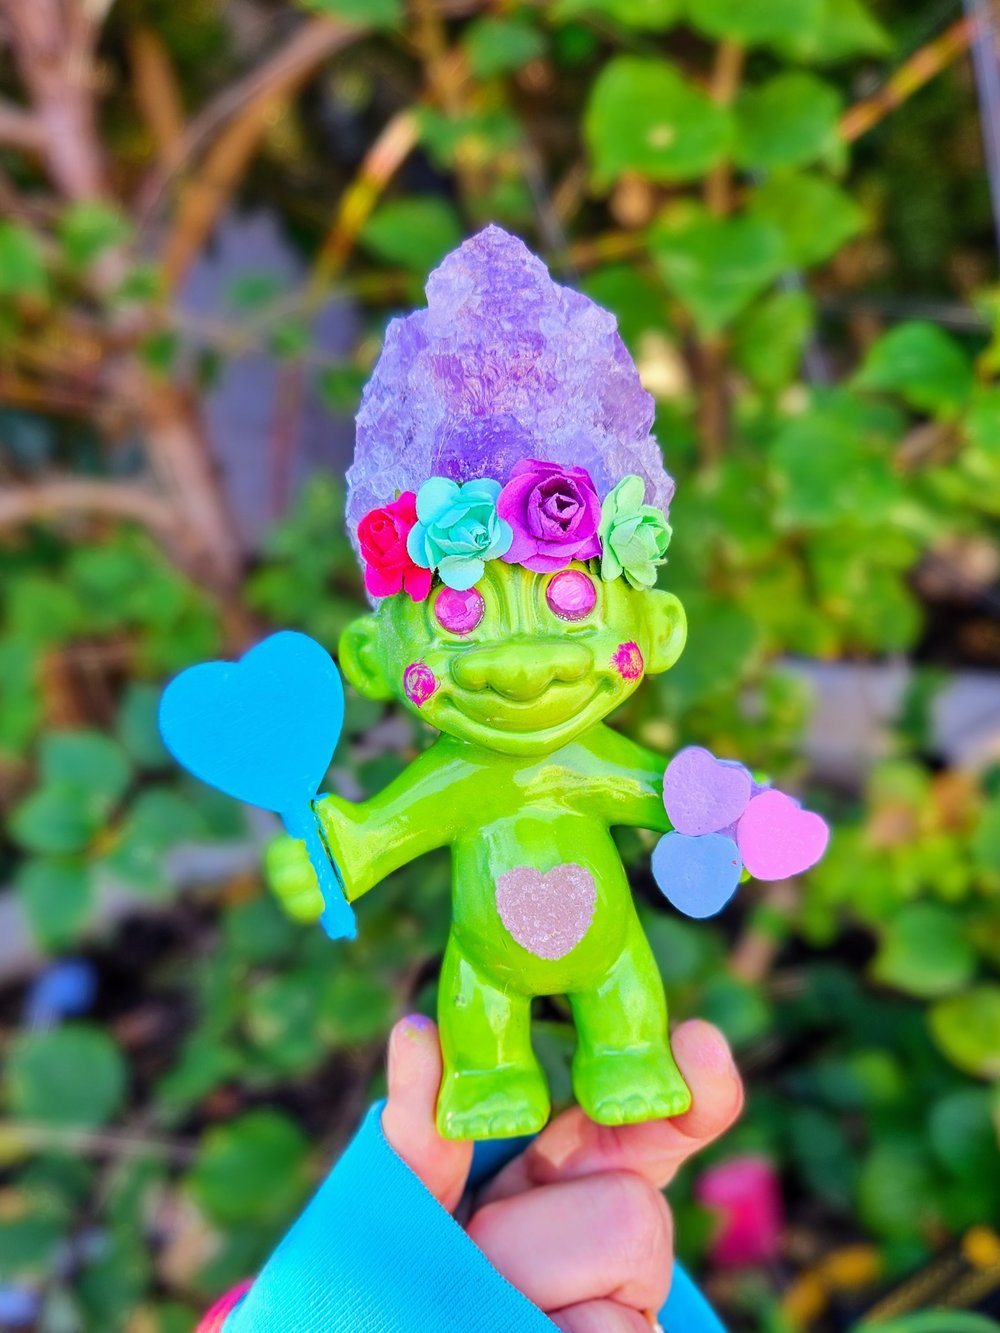 Amethyst Candy Heart Troll with Blue Personalized Candy Heart MSG 6"